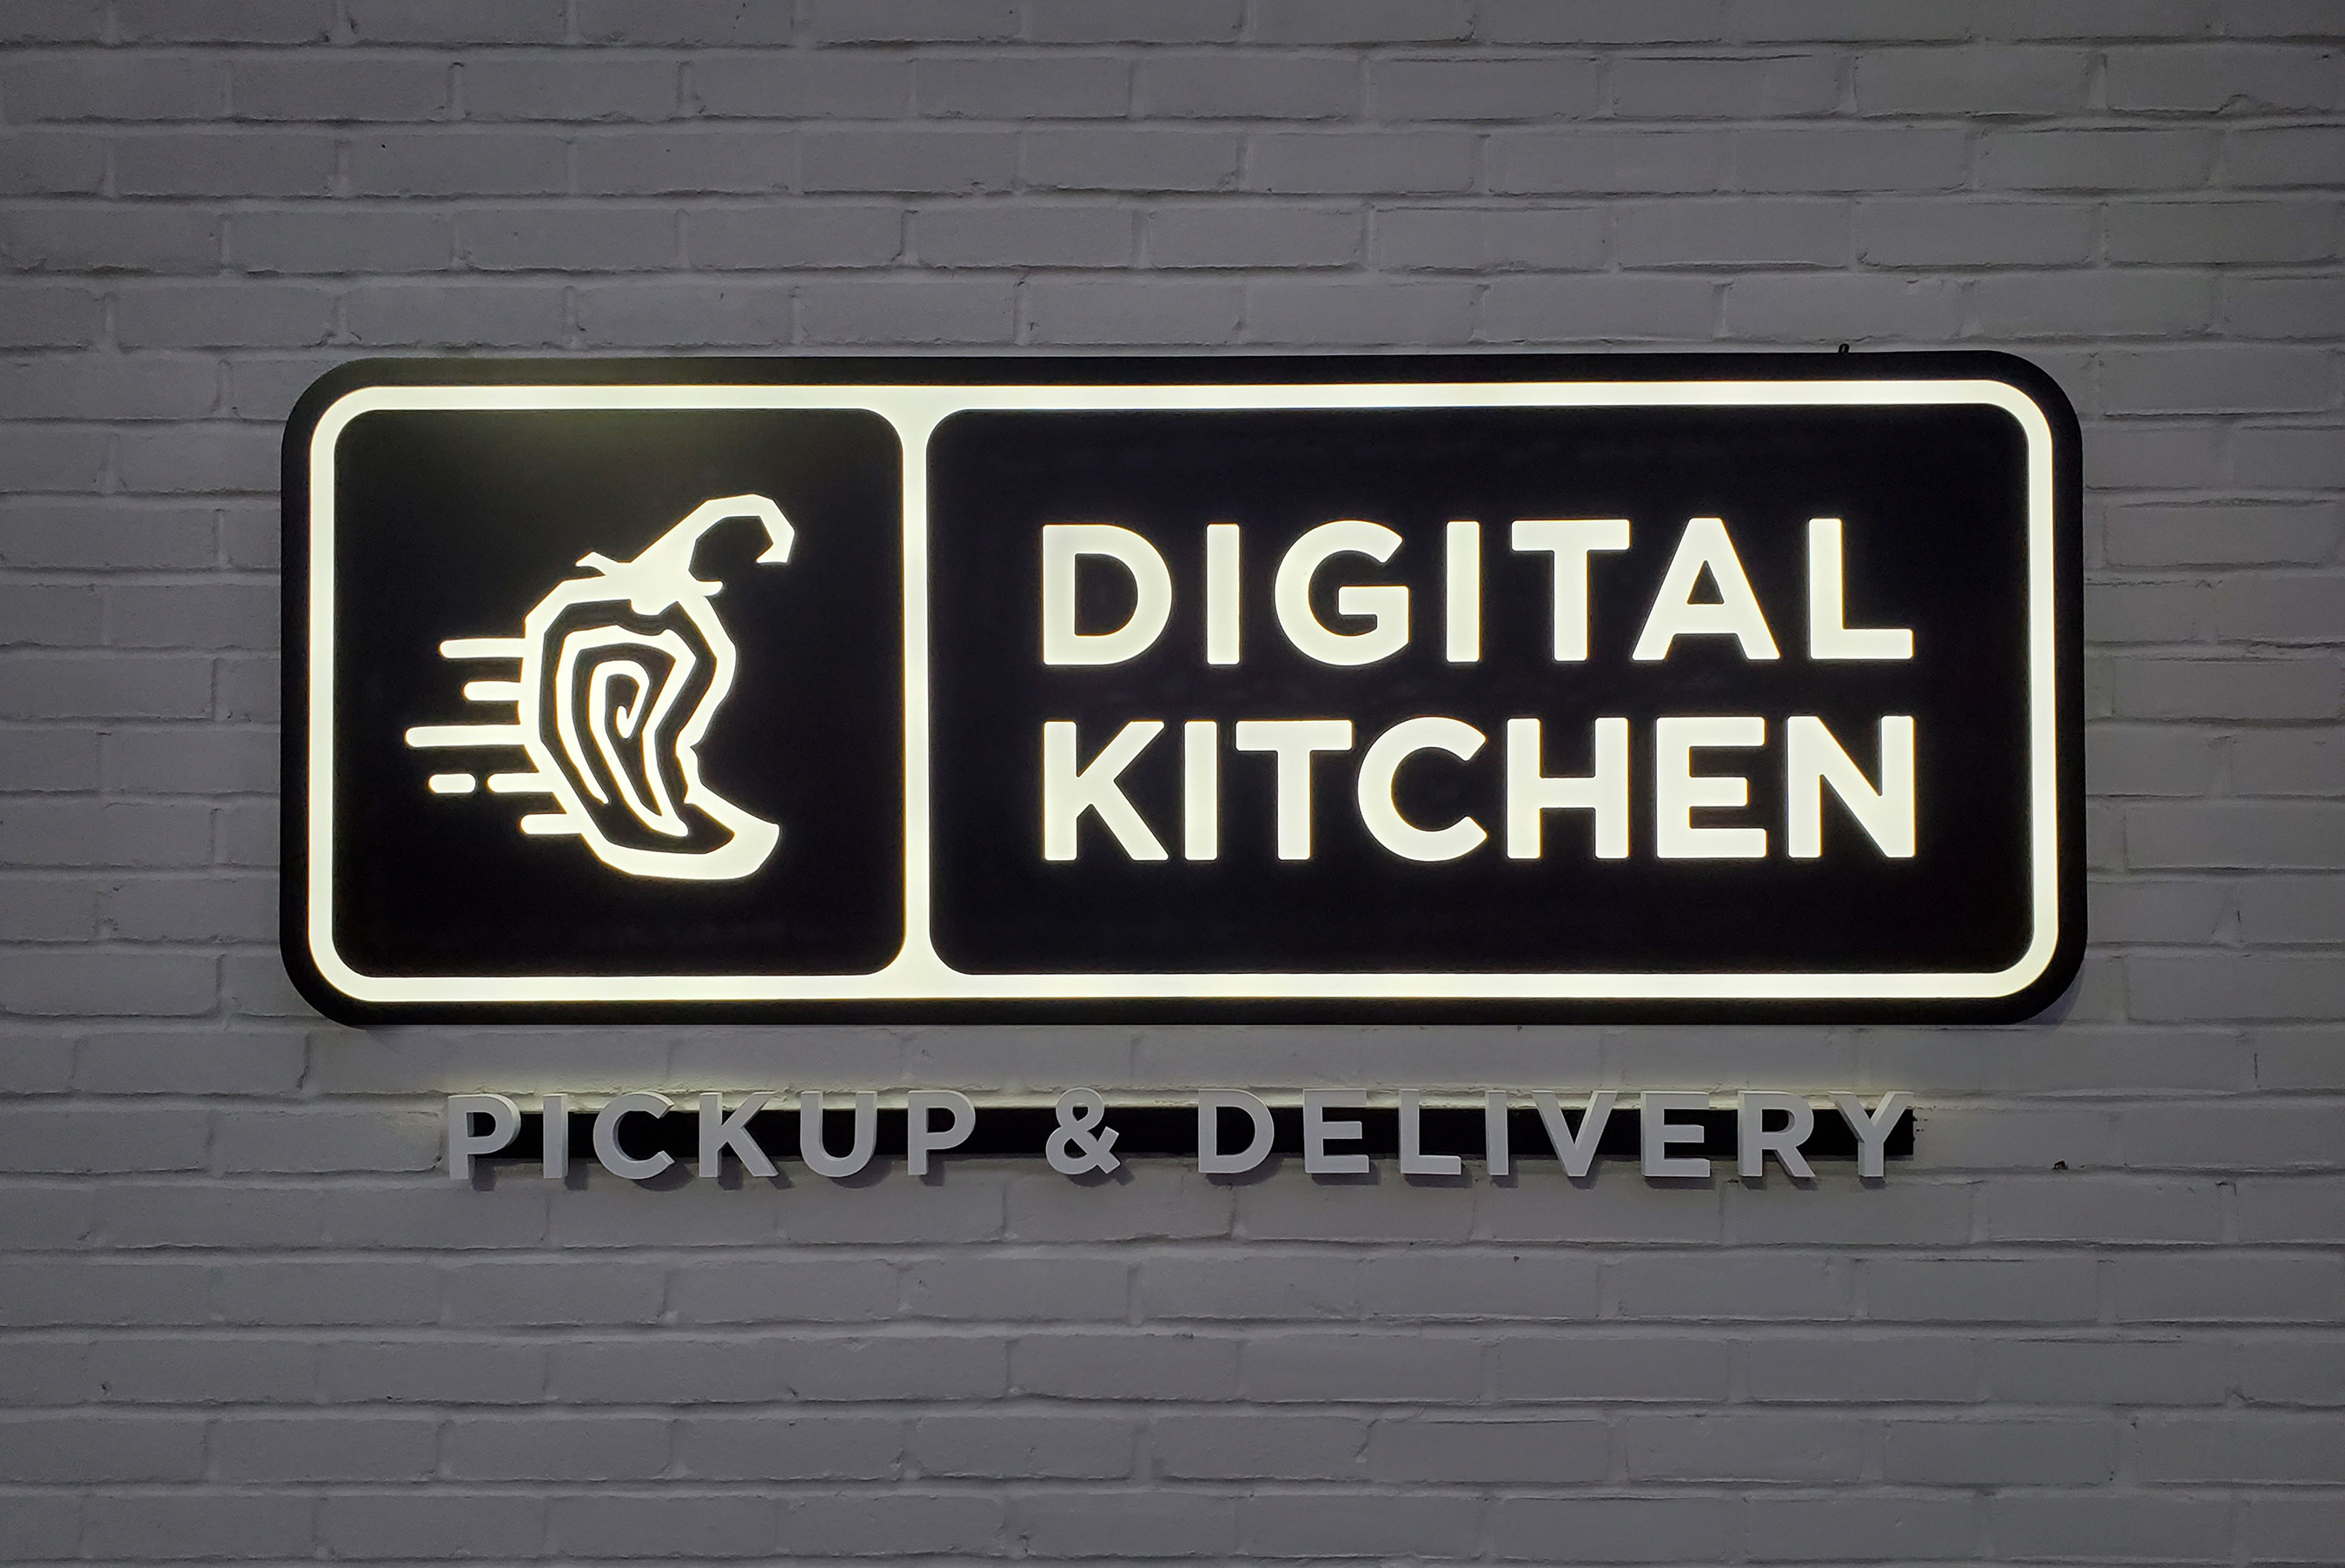 Chipotle’s second digital-only restaurant prototype serves guests who order ahead on the Chipotle app and Chipotle.com, and marketplace partners.